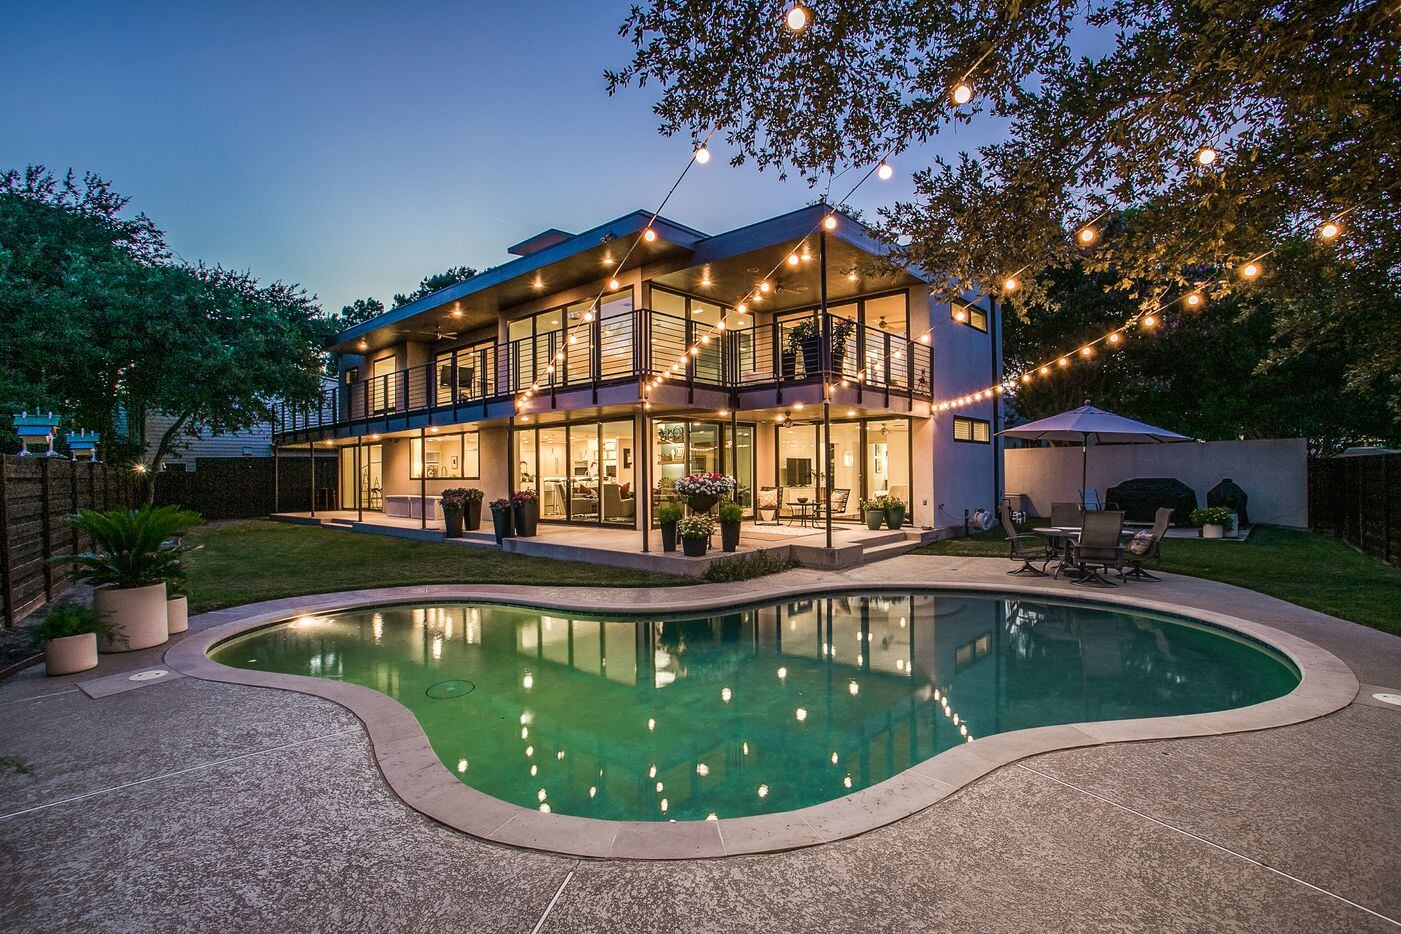 Take a look at the home at 9446 Spring Hollow Drive in Dallas.